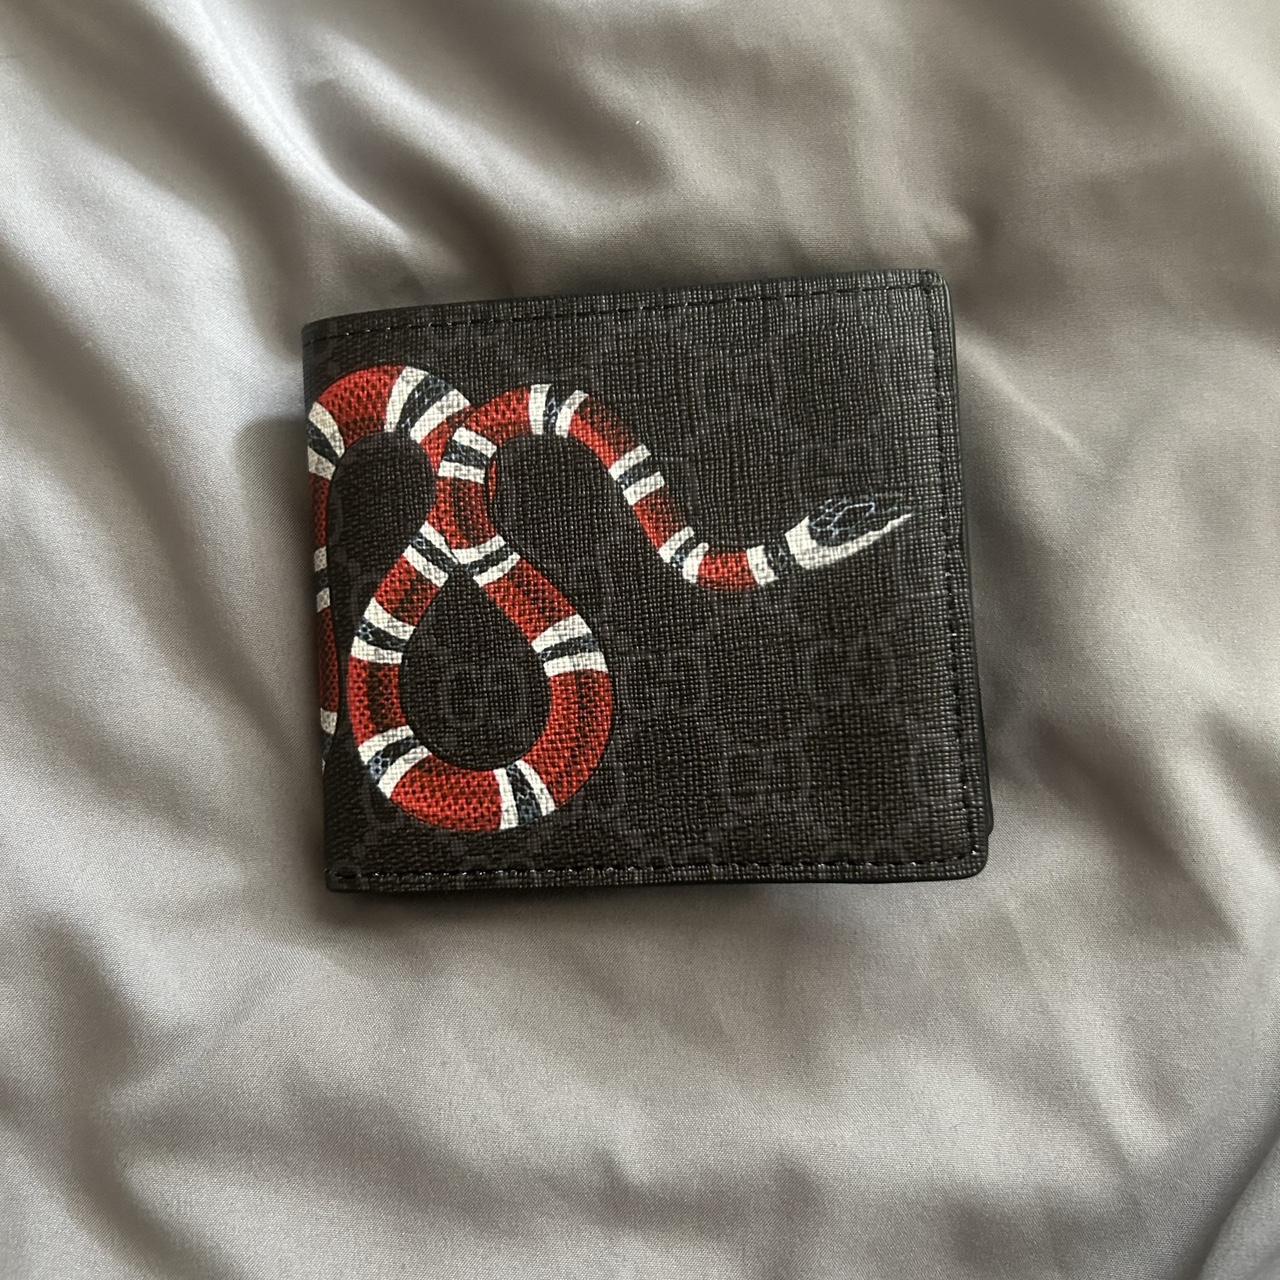 Louis vuitton & Gucci (OG) Wallet 🚫SOLD OUT🚫 Available Dm to